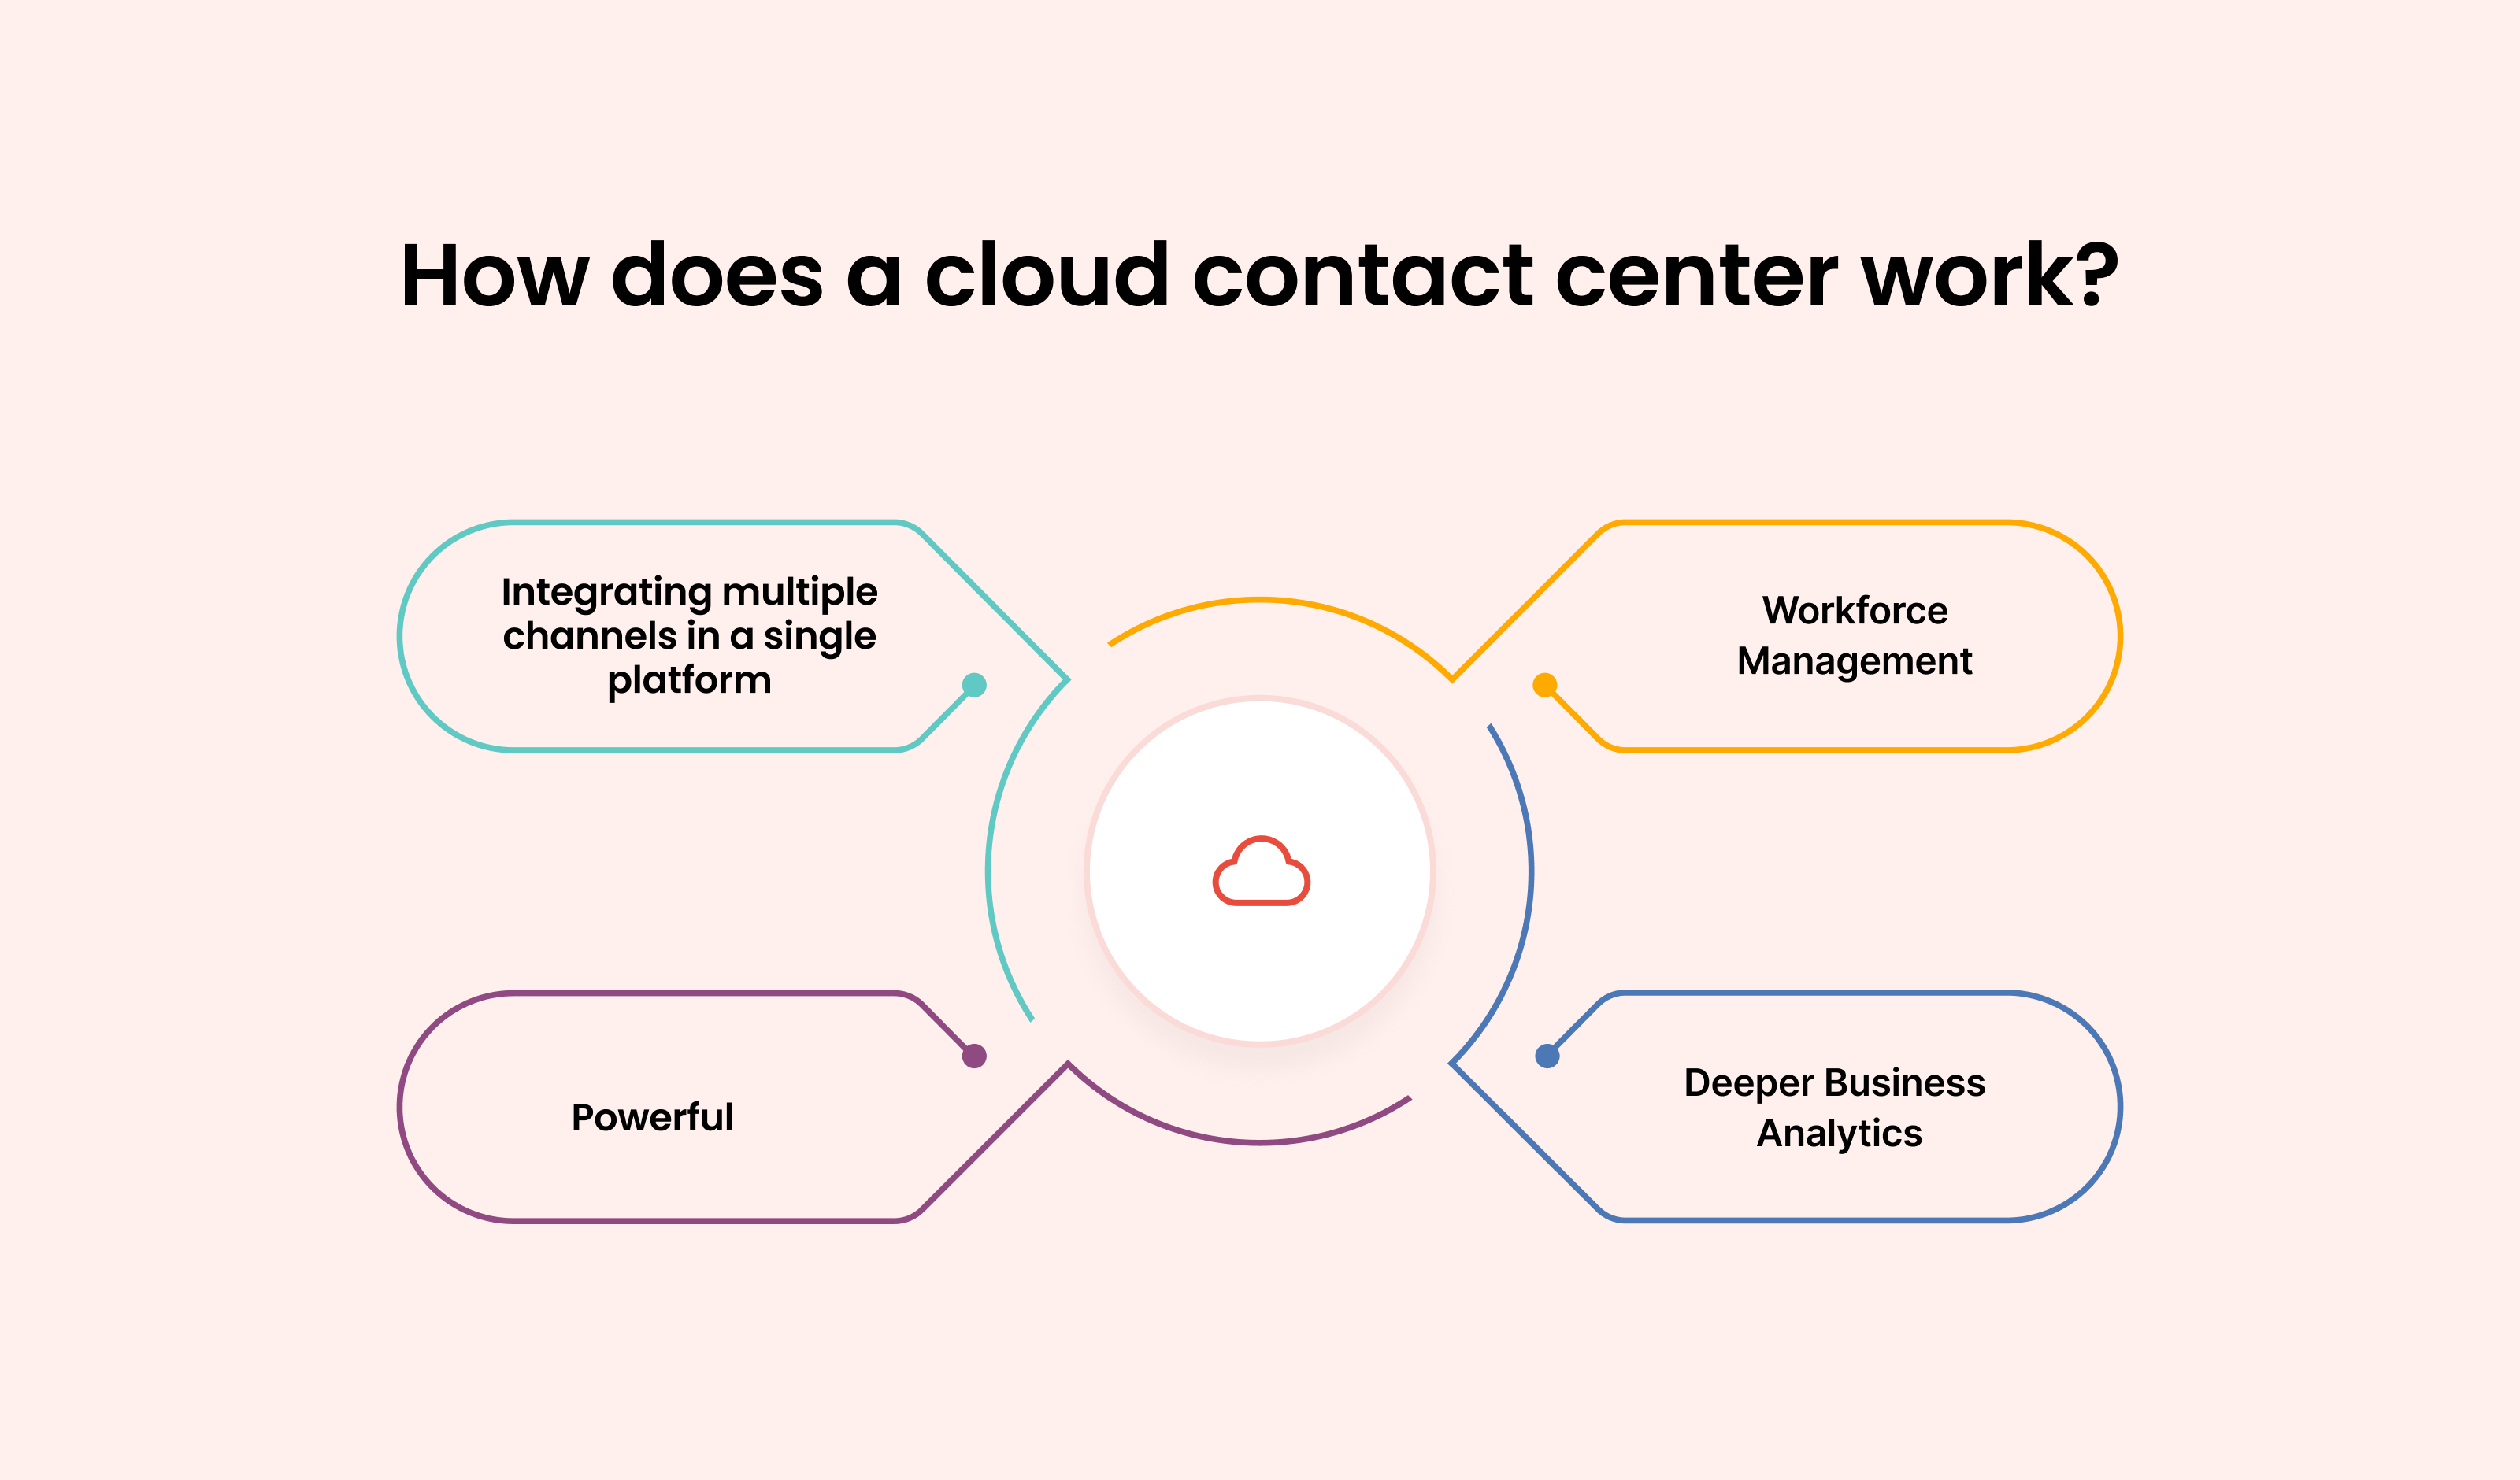 How does a Cloud Contact Center work?